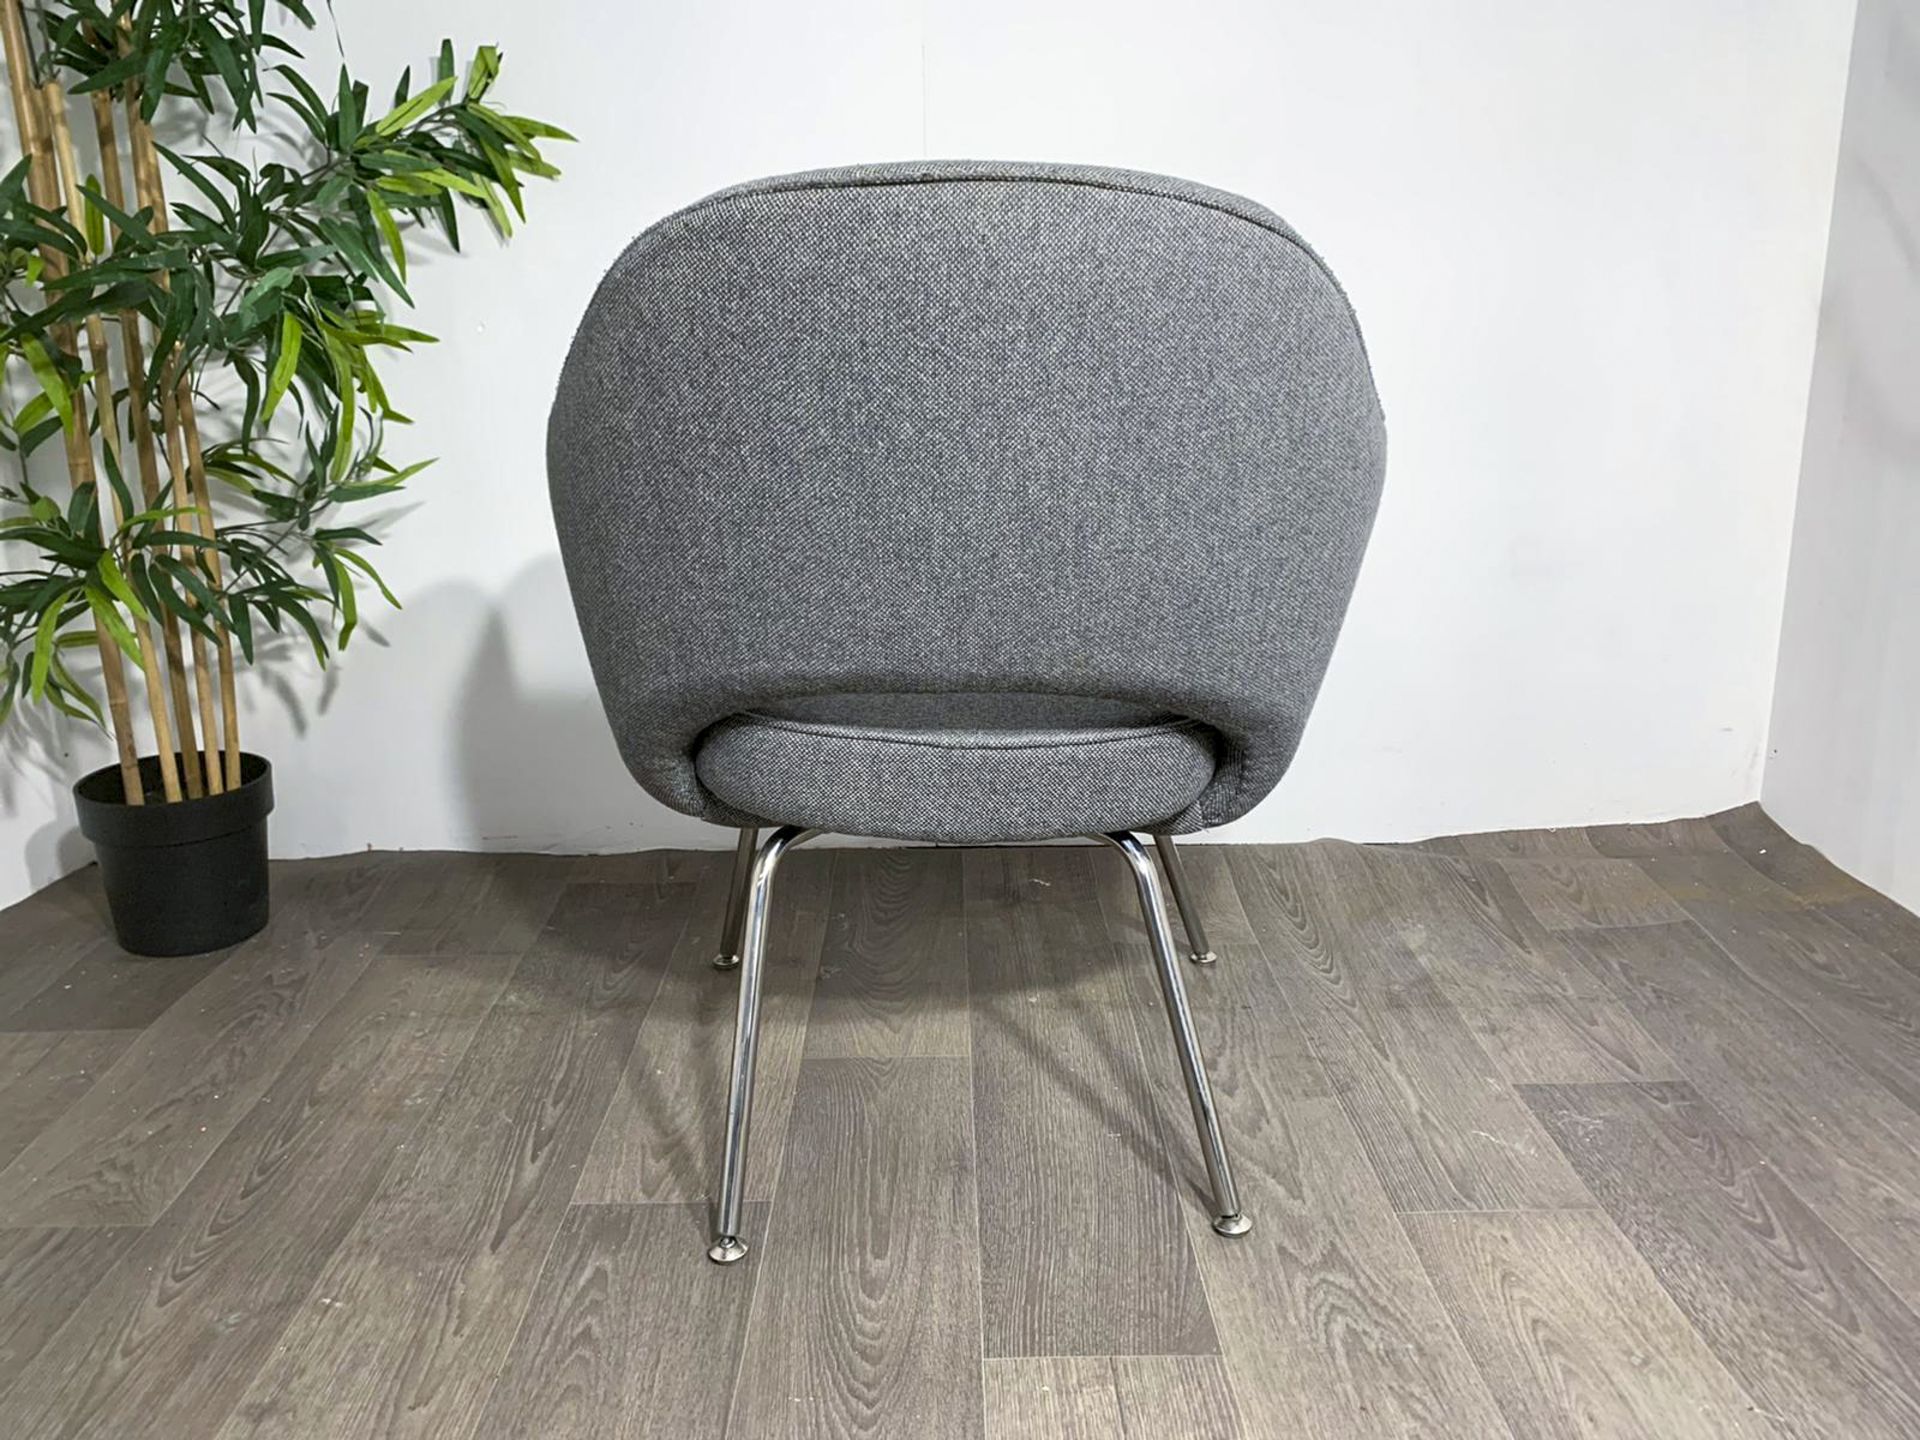 Grey Fabric Commercial Grade Chair with Chrome Legs x2 - Image 3 of 9